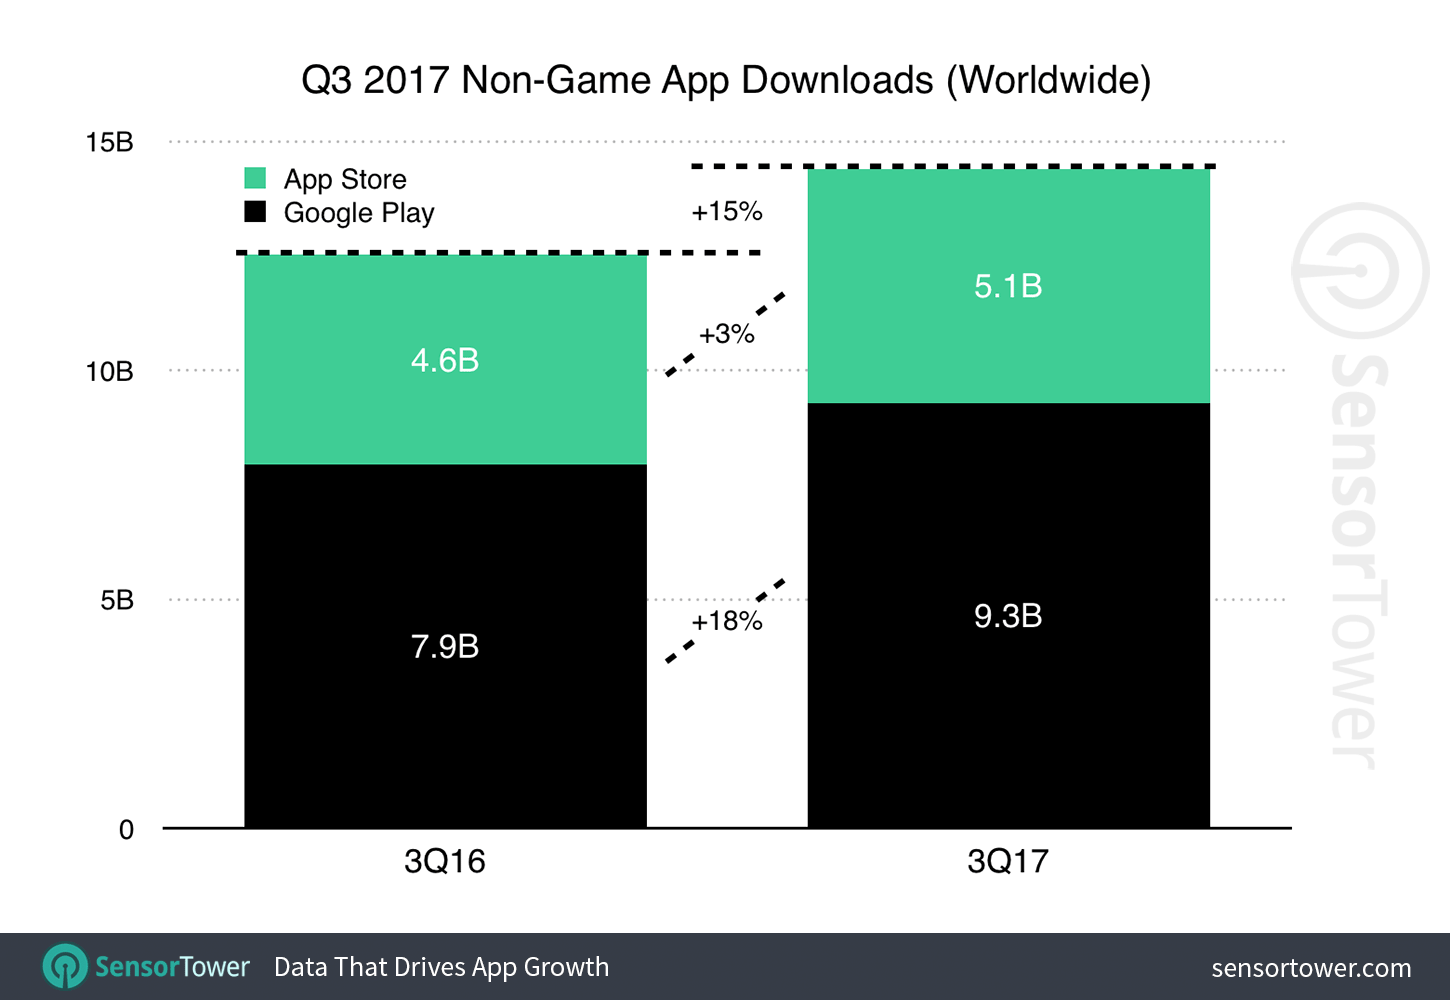 Q3 2017 Apps Worldwide Download Growth